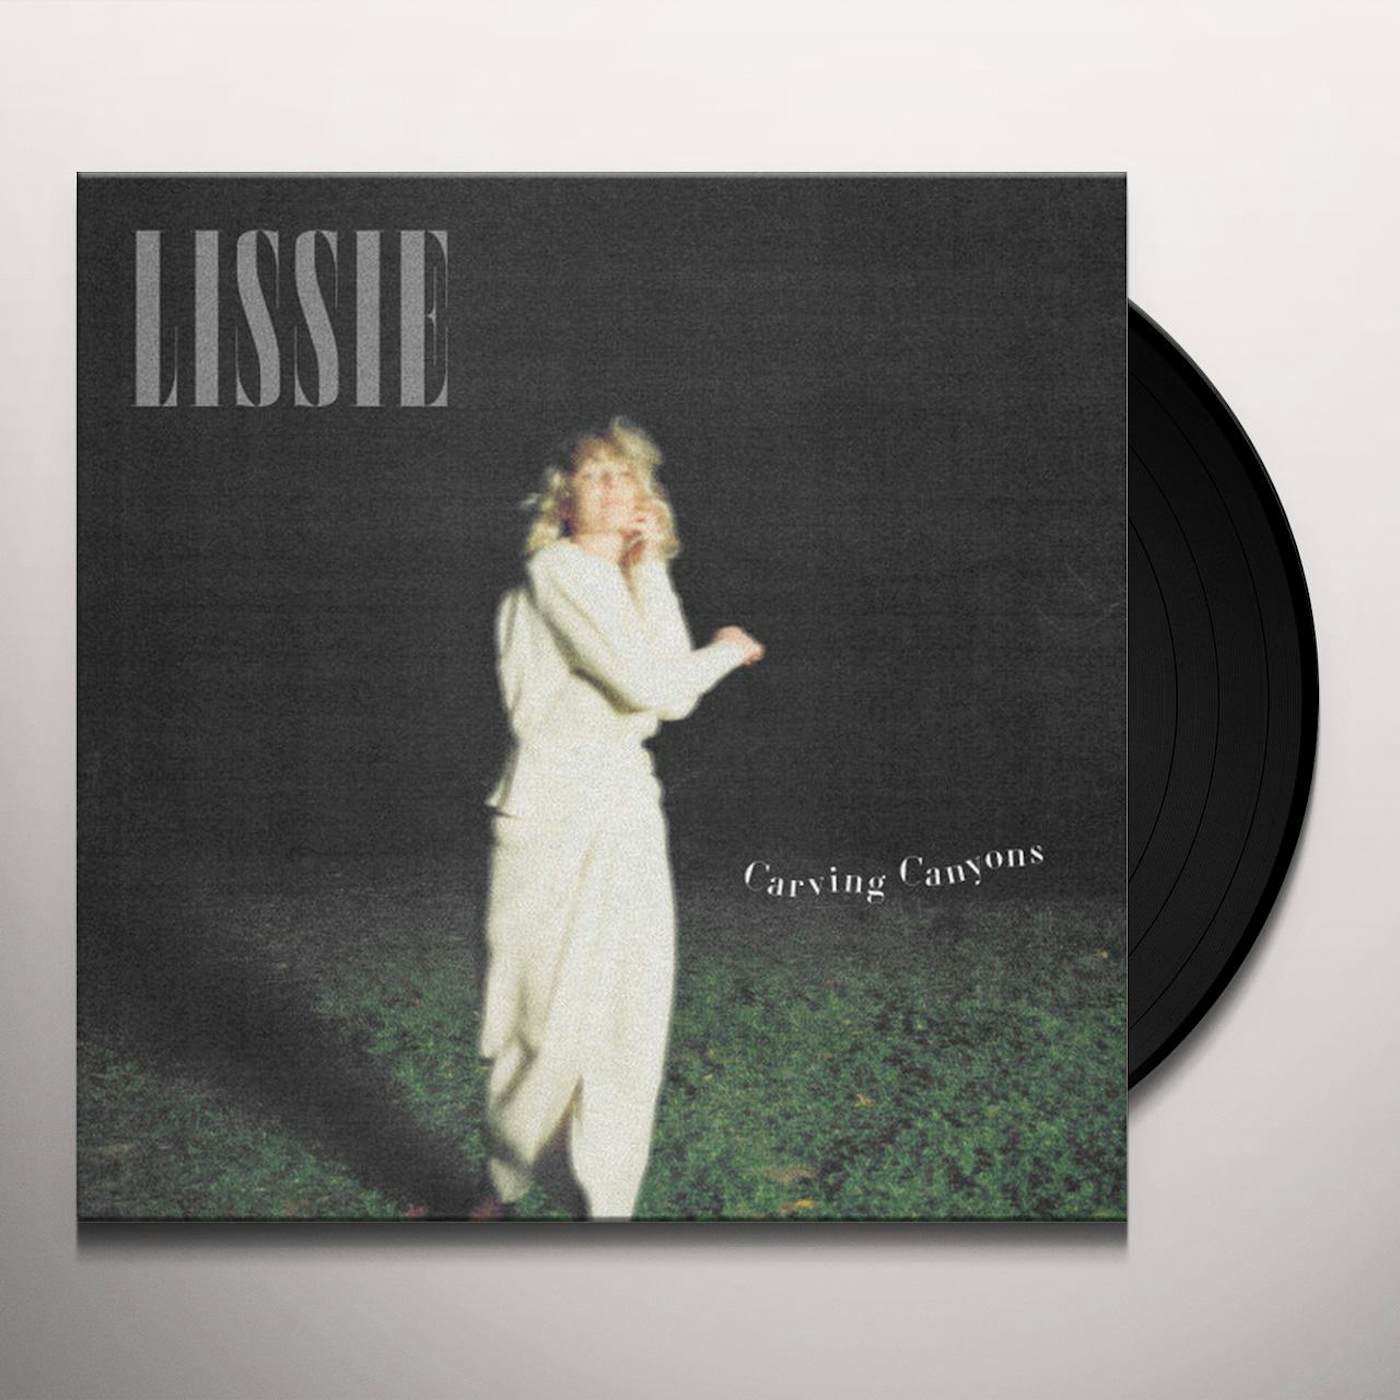 Lissie Carving Canyons Vinyl Record